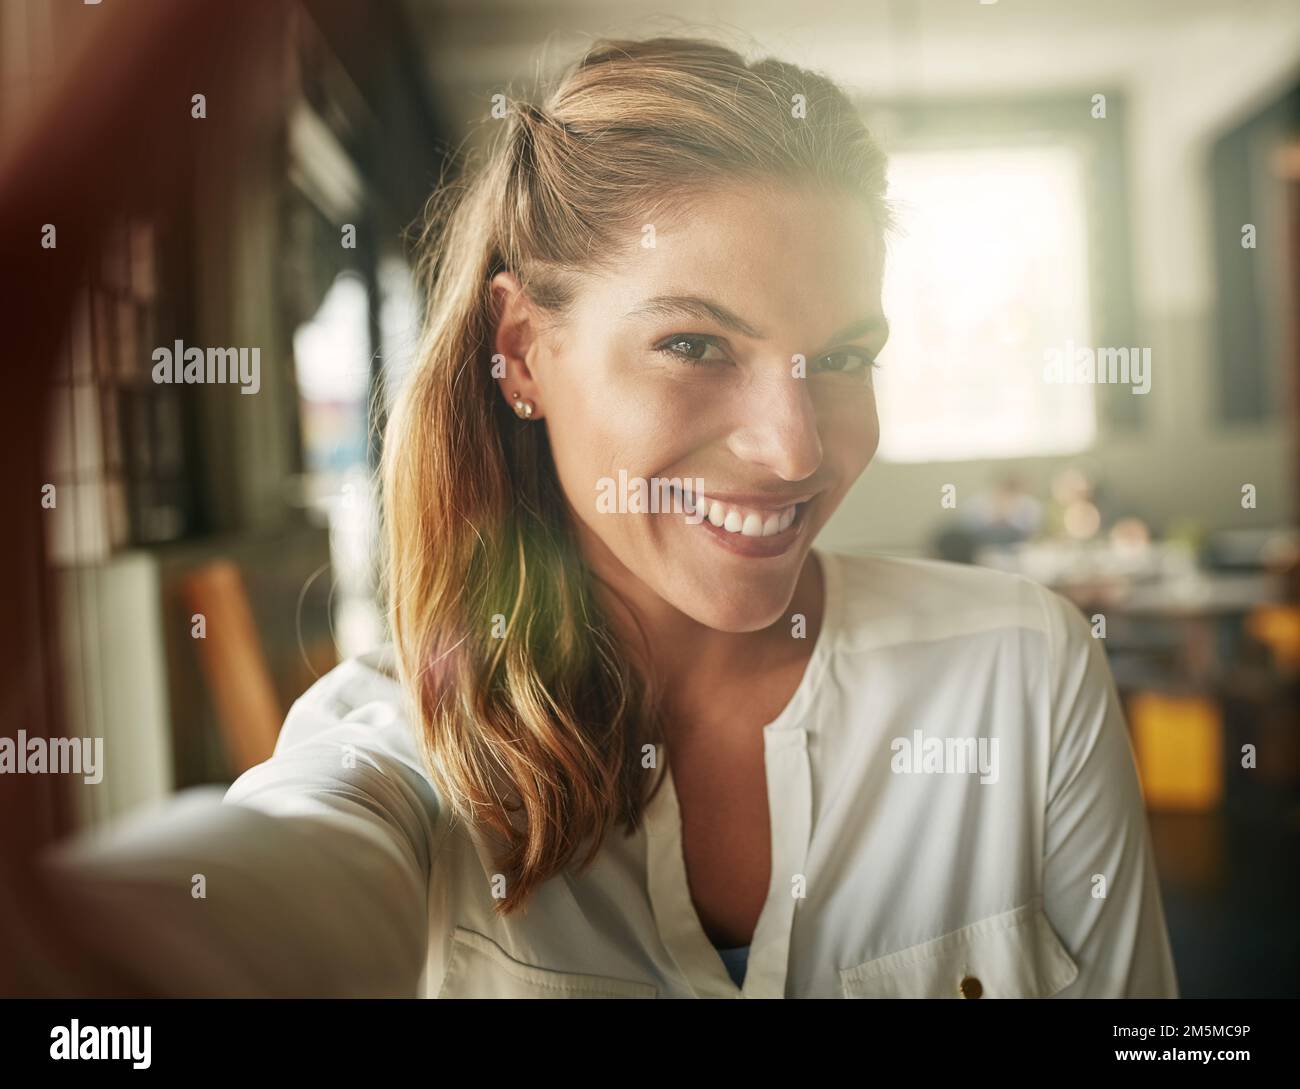 Taking a selfie in her favourite coffee shop. an attractive young woman in a coffee shop. Stock Photo